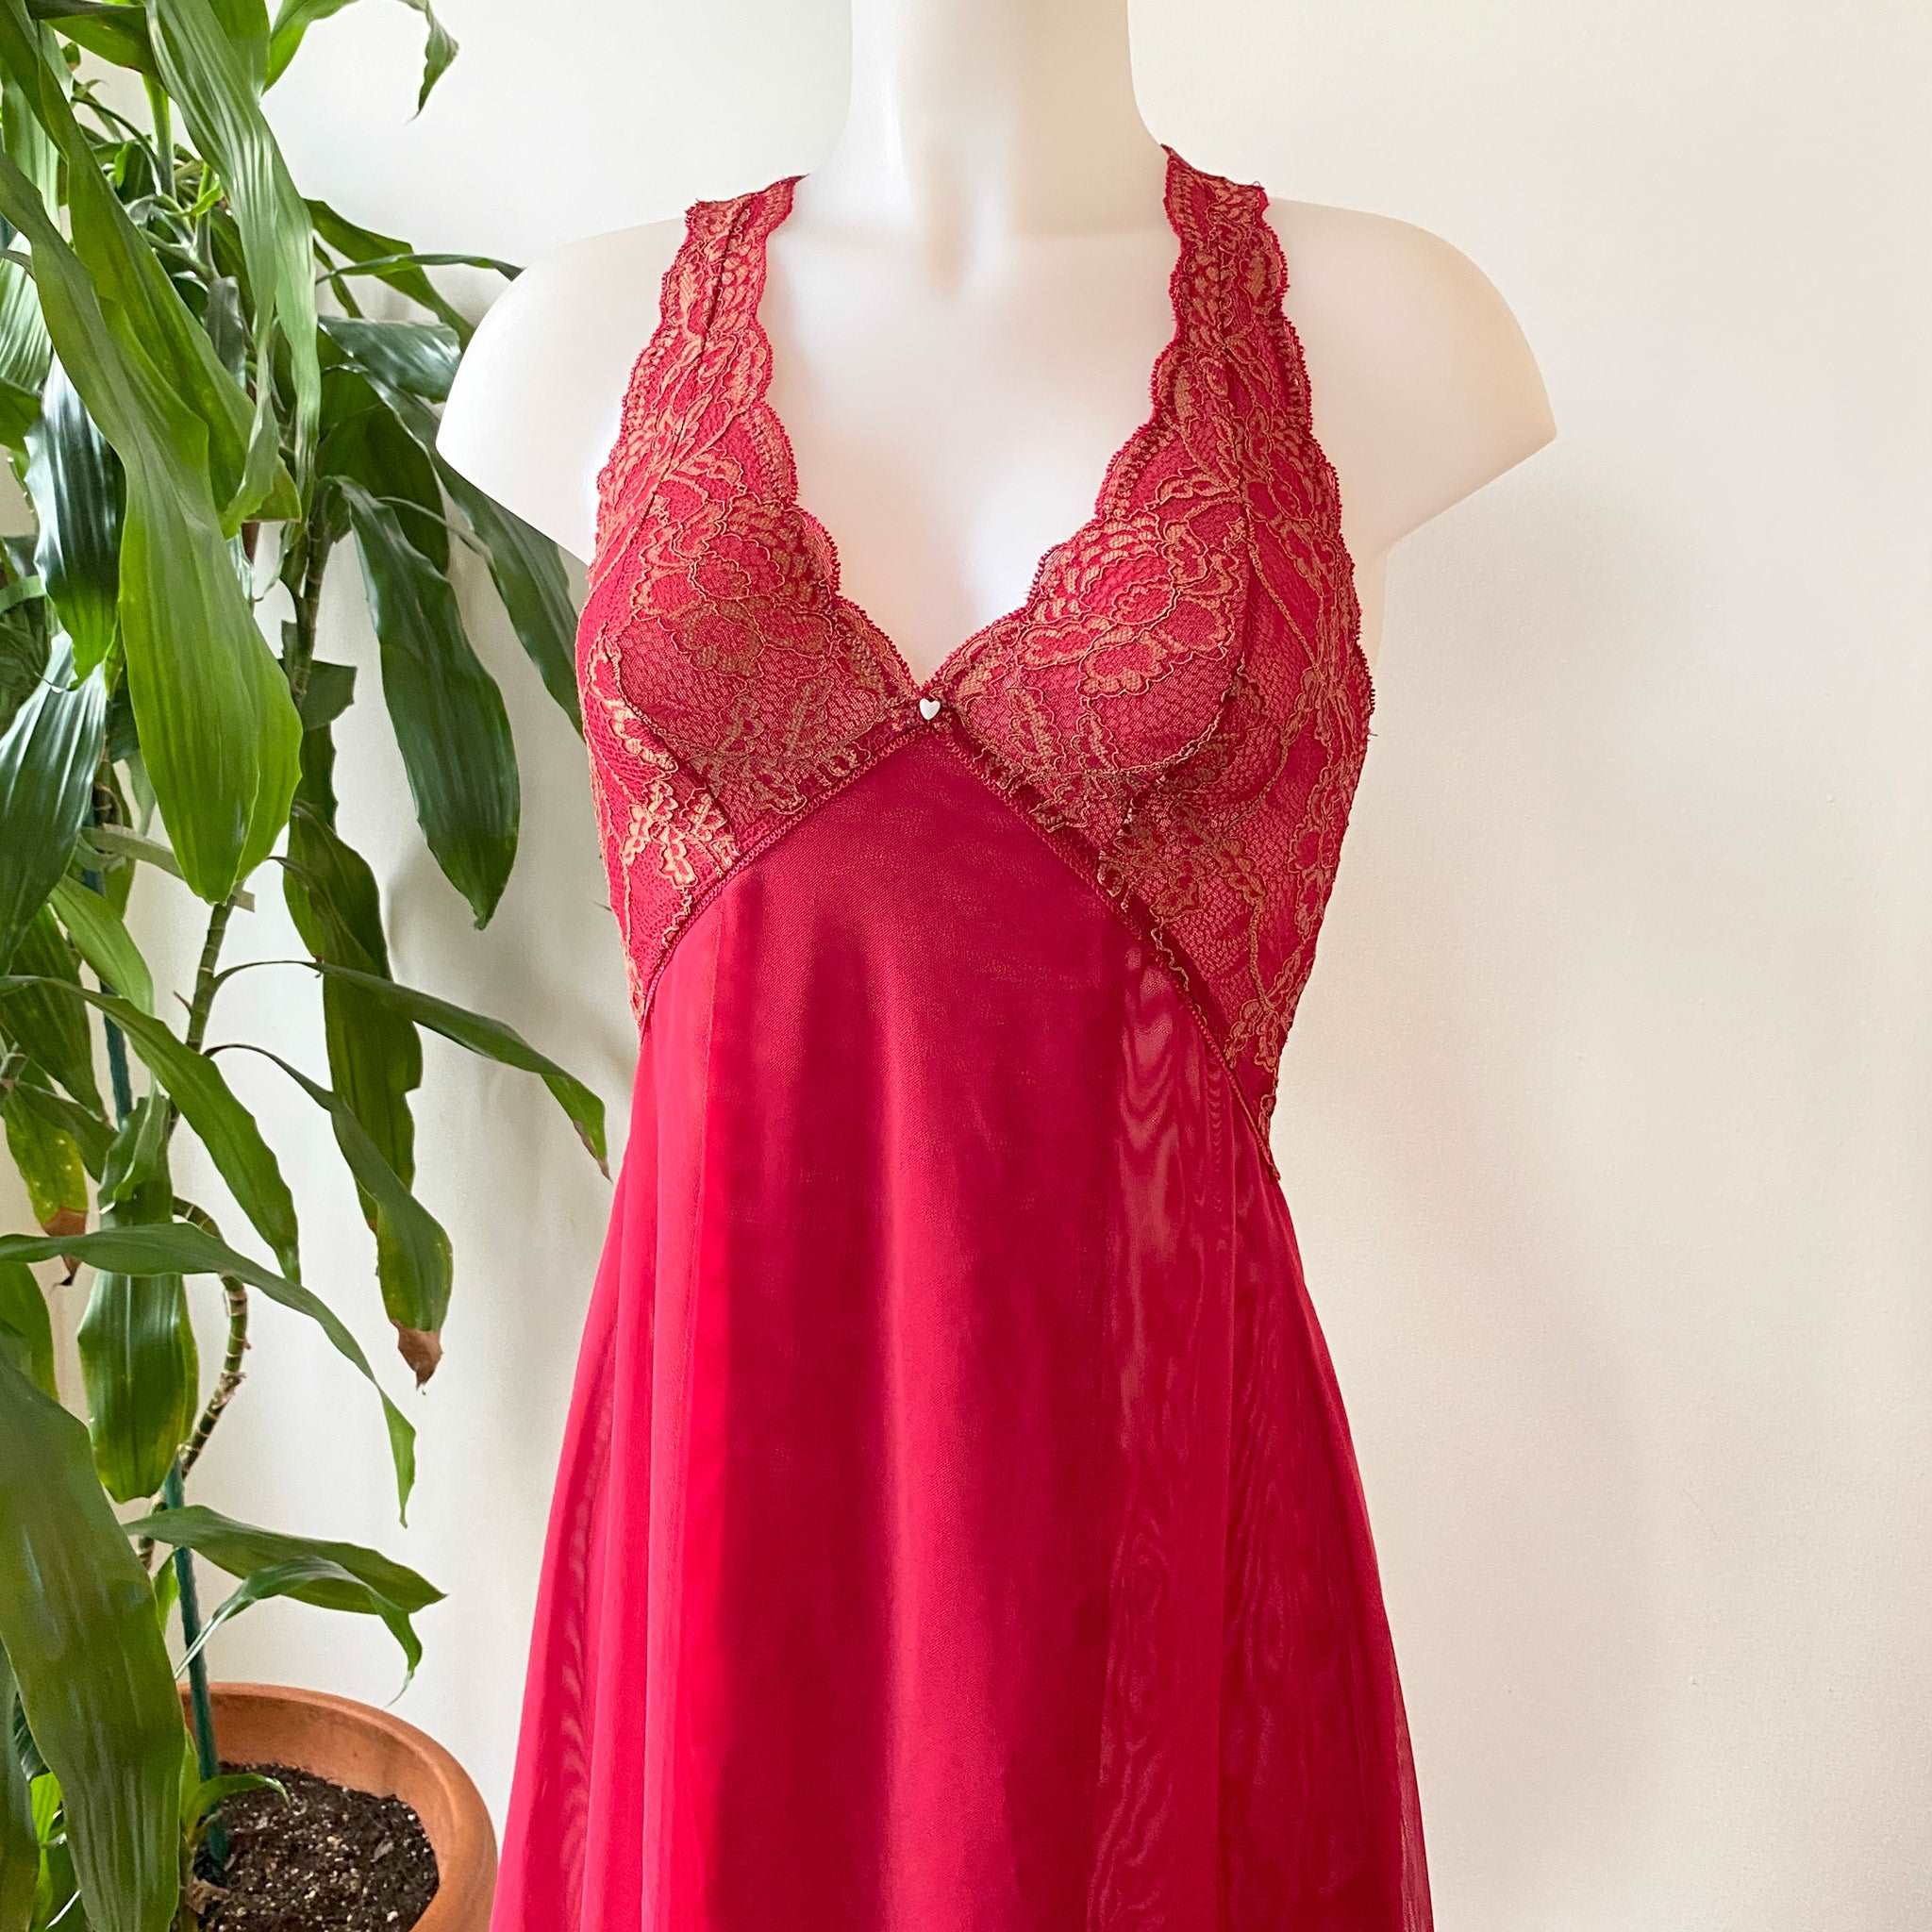 Fortuna Racerback Chemise tule lace red